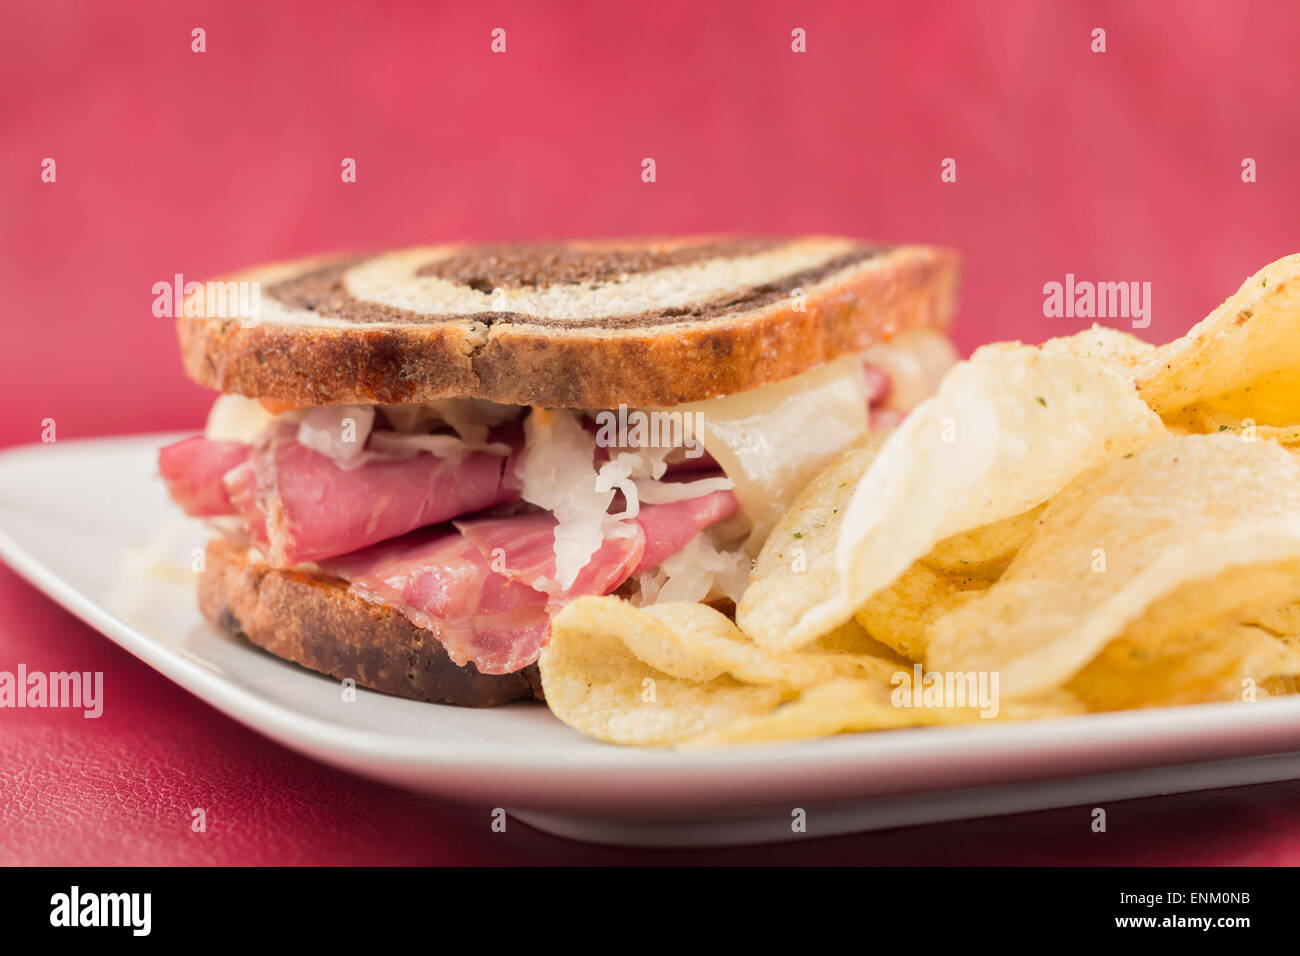 Classic reuben sandwich on pumpernickel swirl rye bread. A hearty meal with a side of pickle and chips Stock Photo